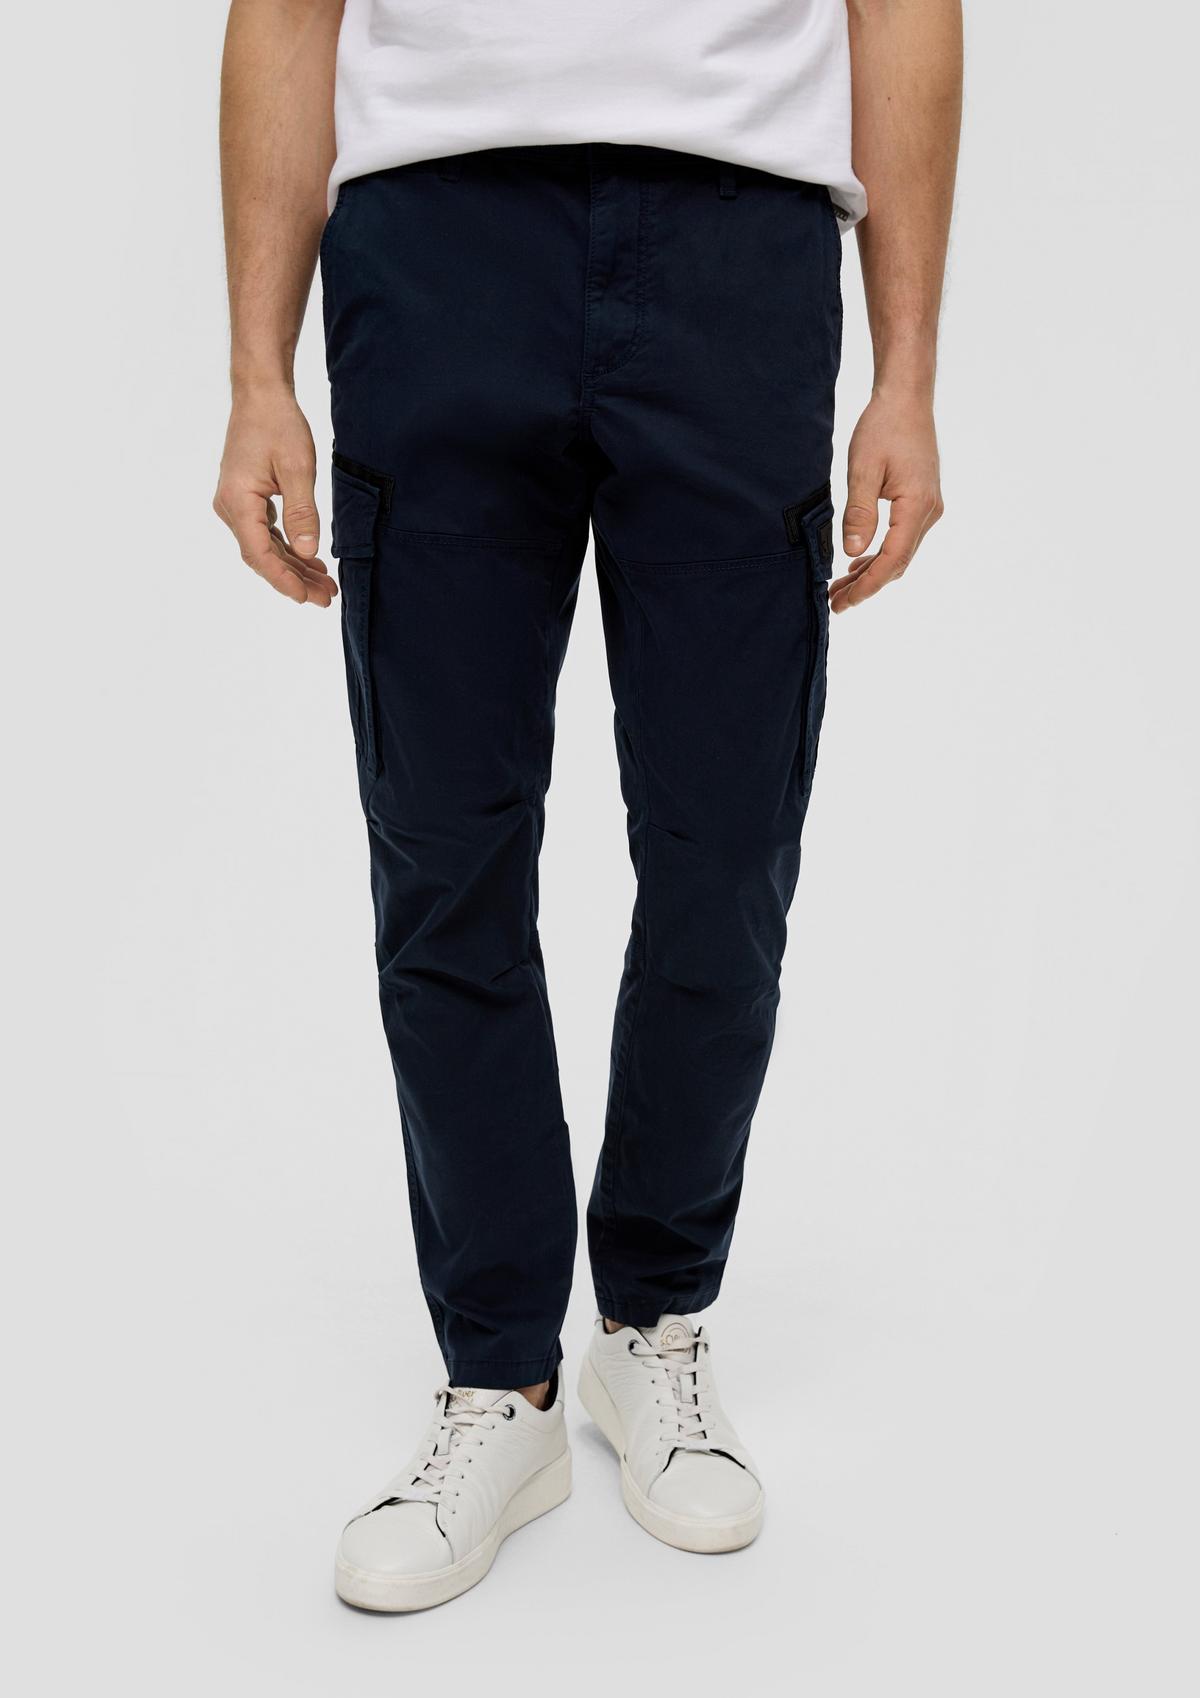 s.Oliver Phoenix: cargo trousers with a slim leg